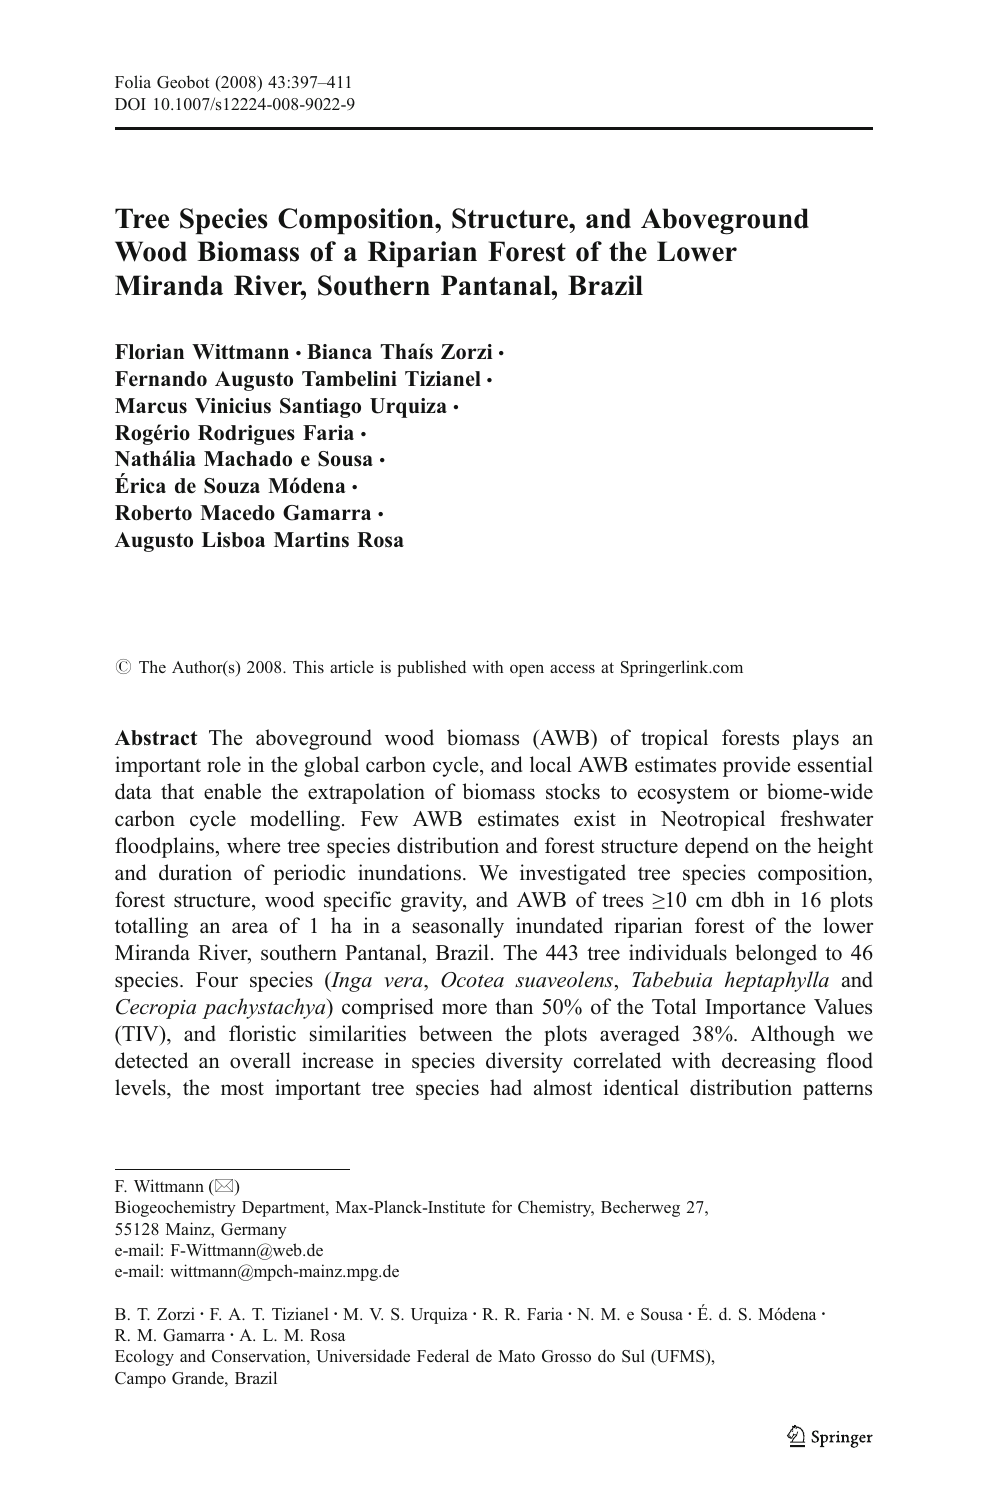 Tree Species Composition Structure And Aboveground Wood Biomass Of A Riparian Forest Of The Lower Miranda River Southern Pantanal Brazil Topic Of Research Paper In Biological Sciences Download Scholarly Article Pdf